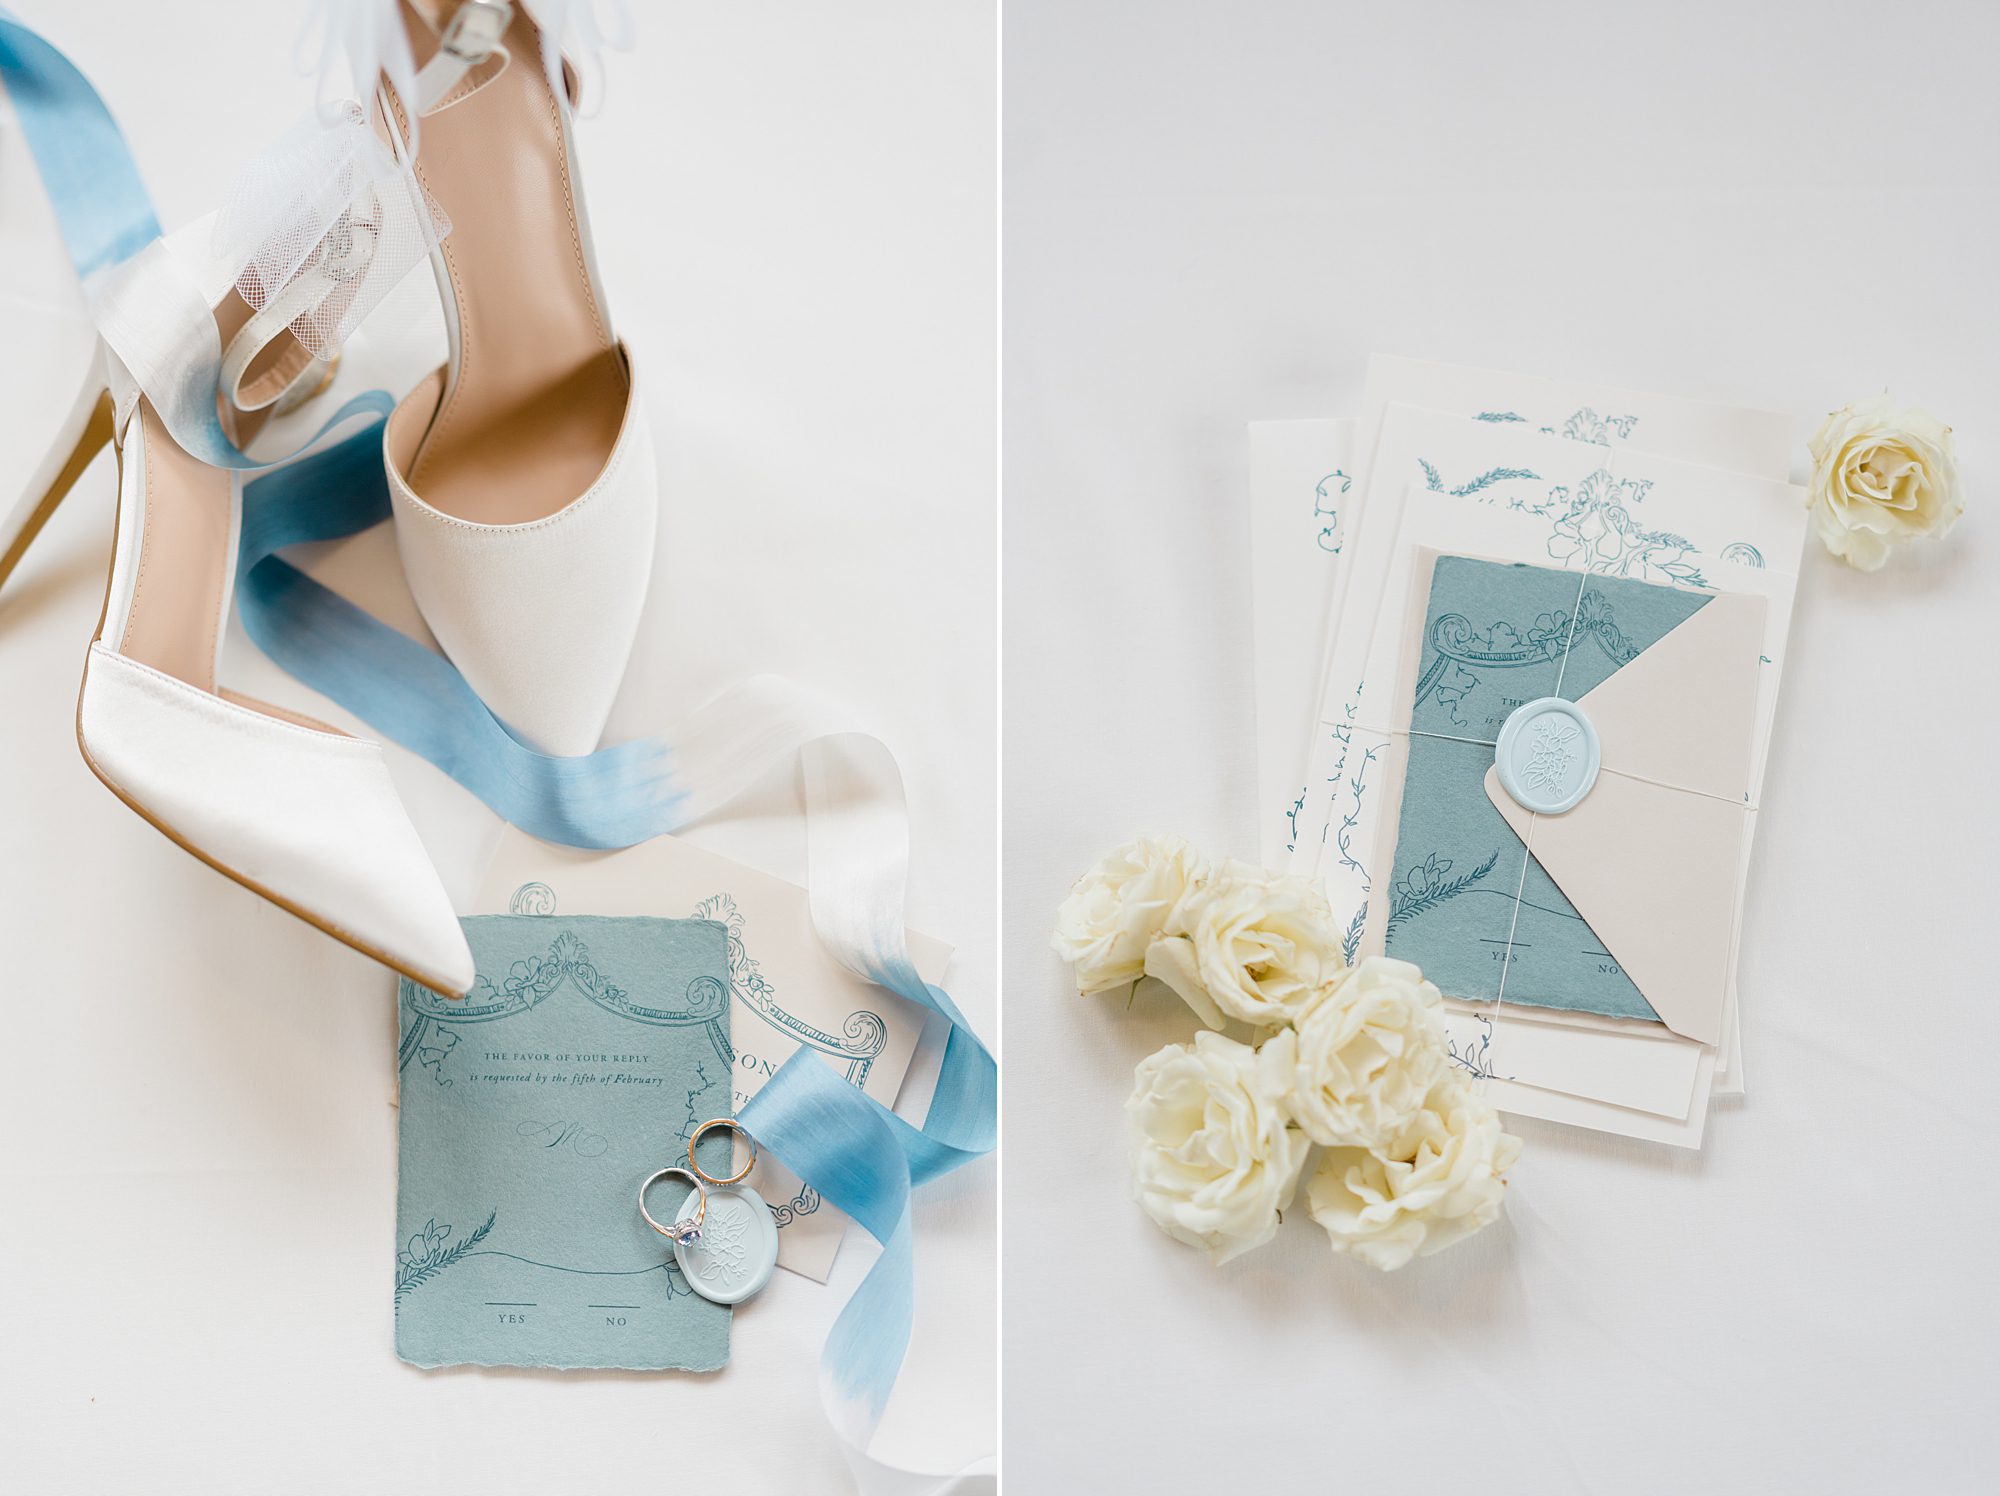 wedding invitations and shoes